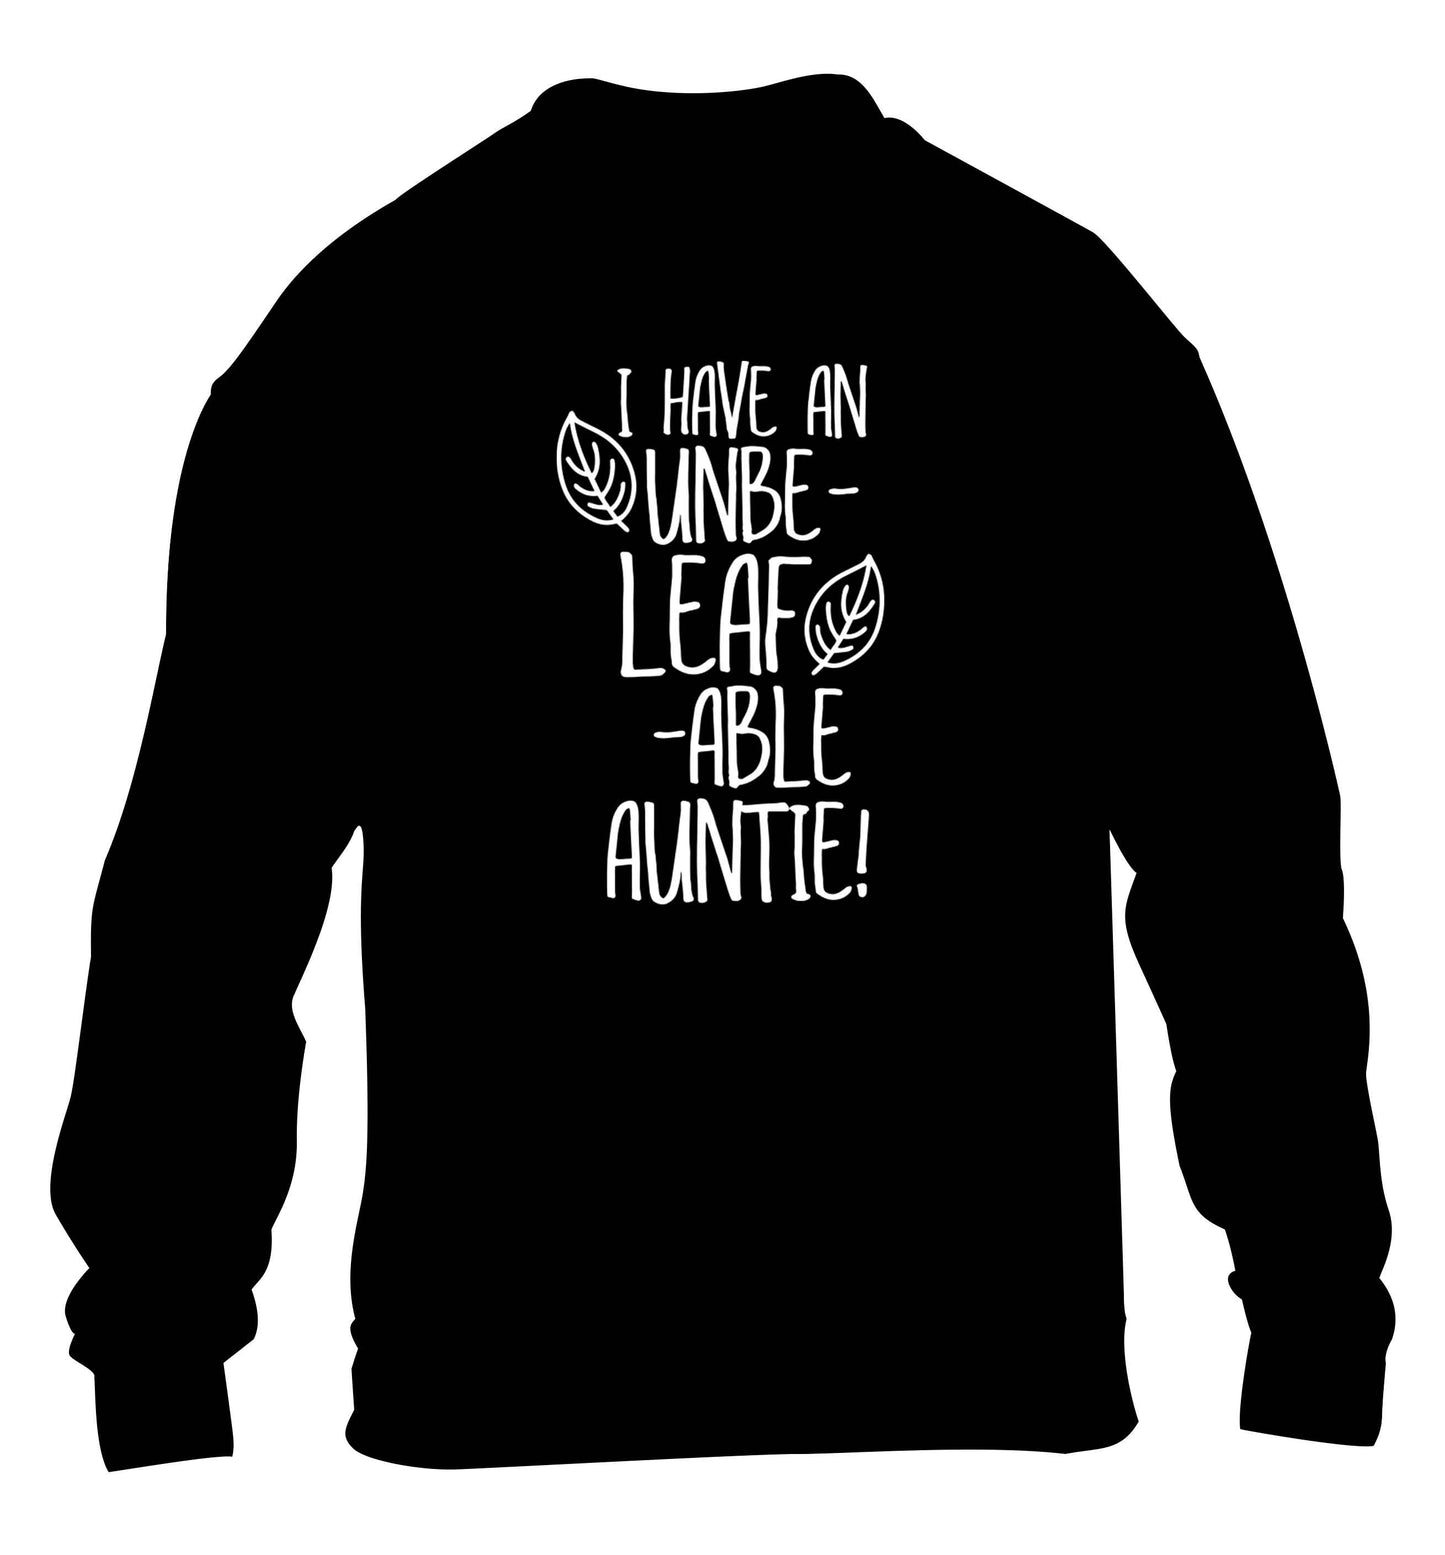 I have an unbe-leaf-able auntie children's black sweater 12-13 Years